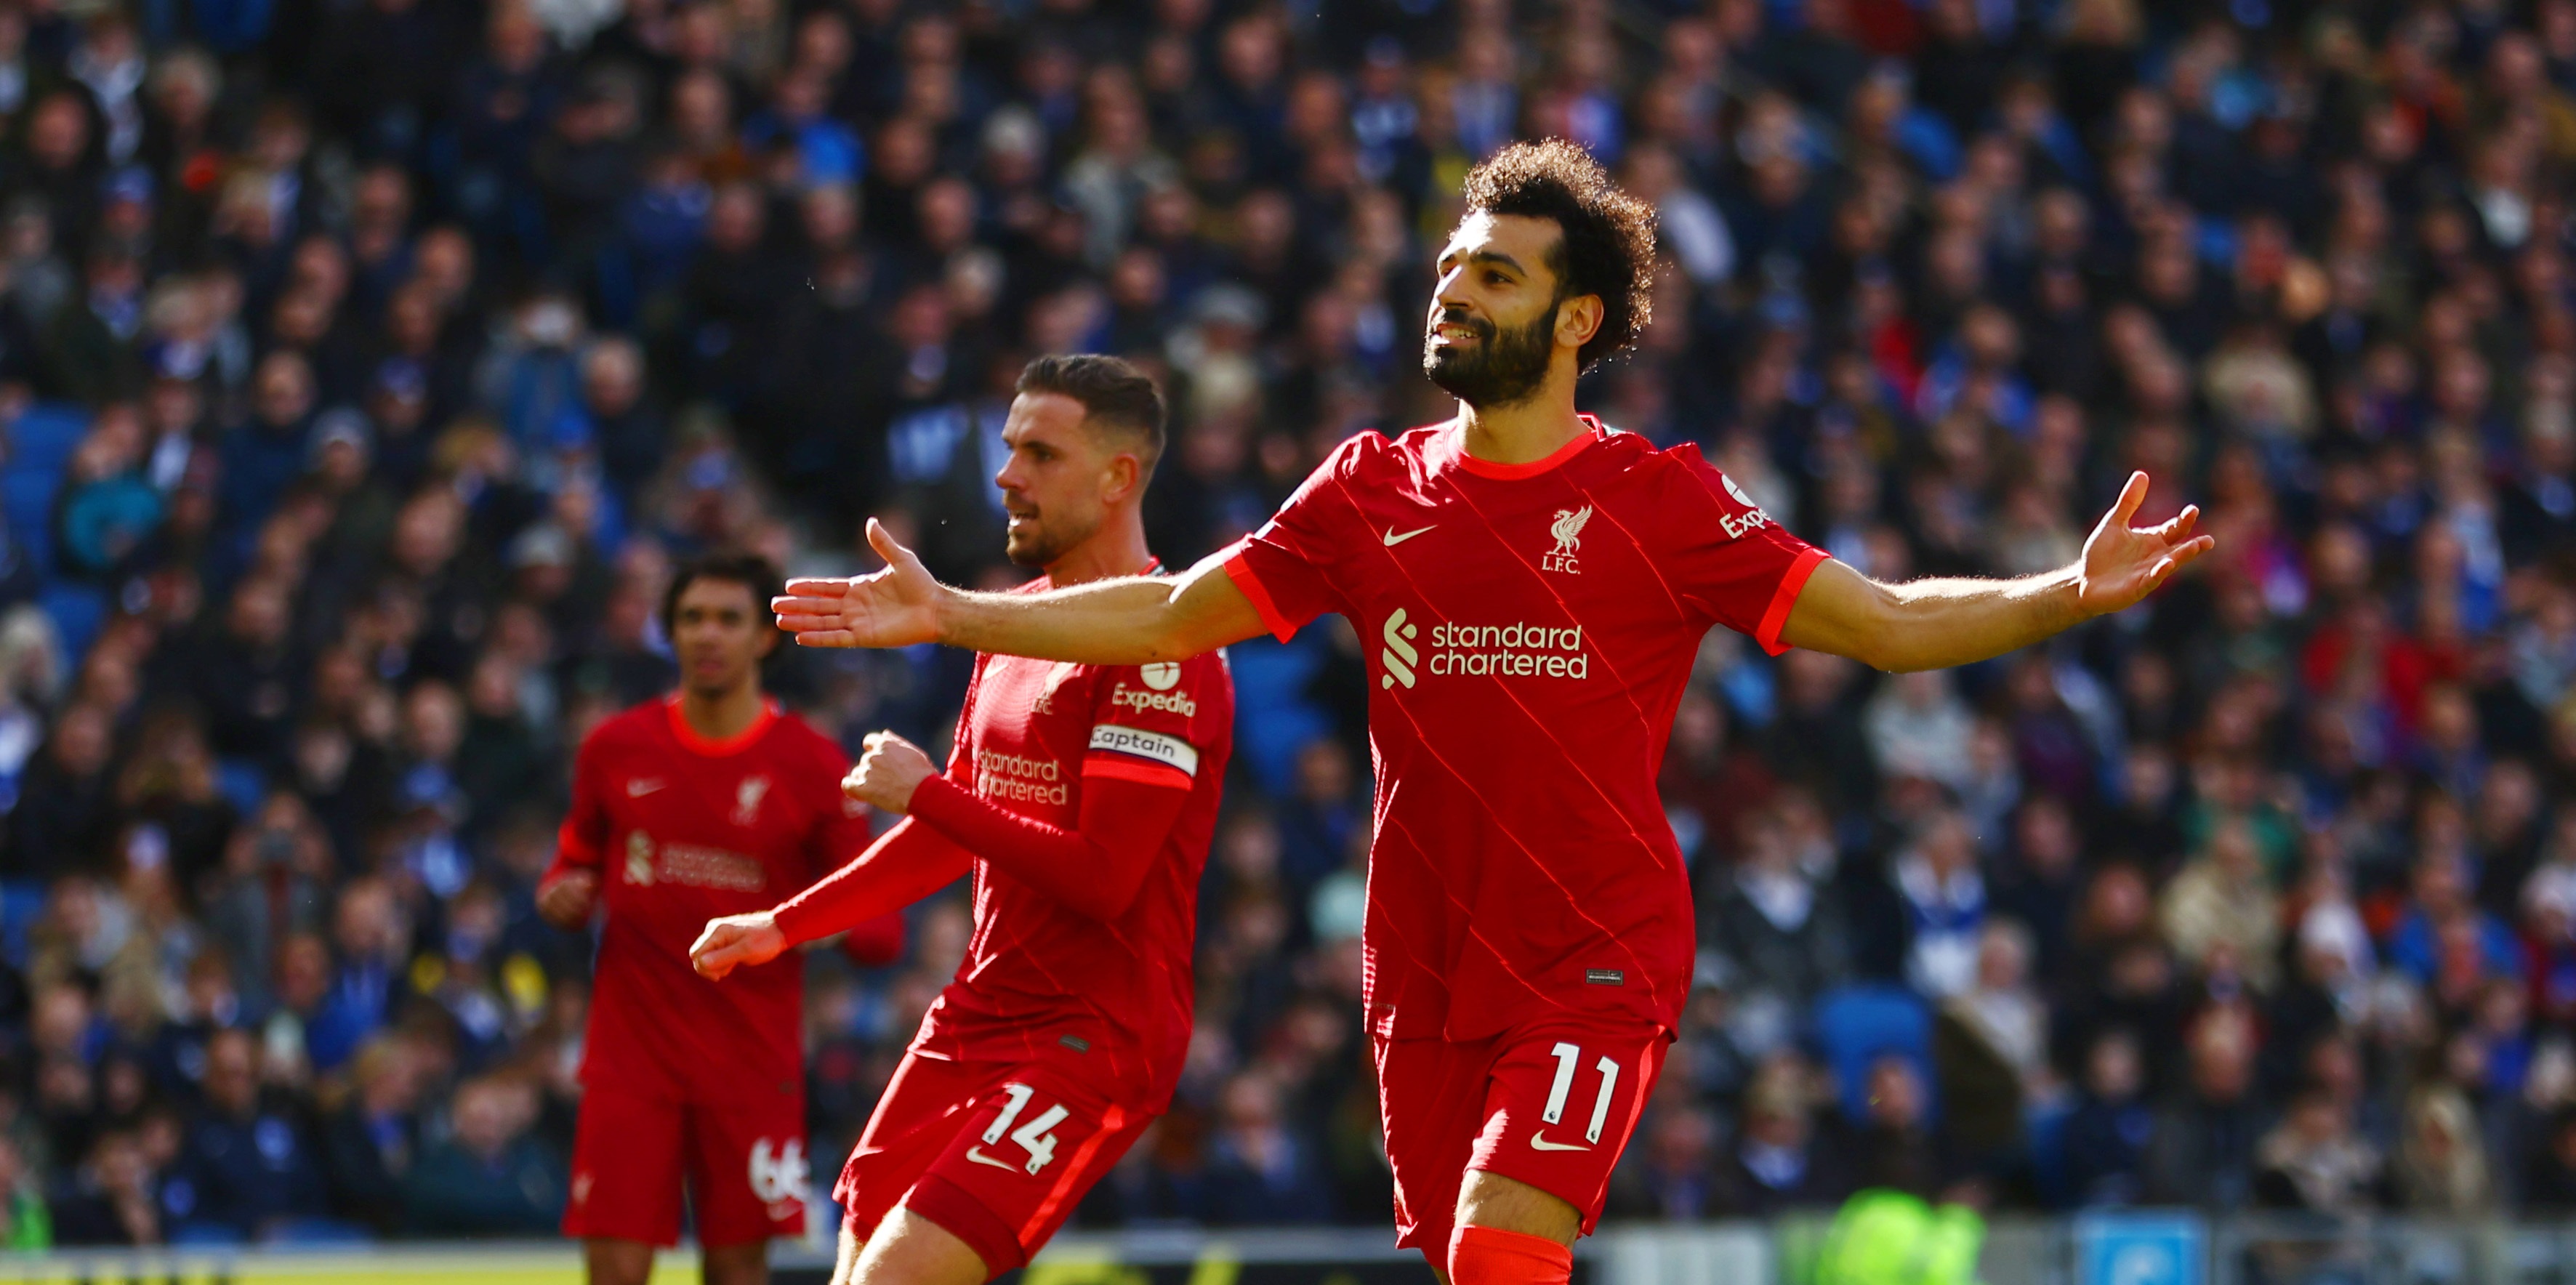 ‘I’m expecting…’ – Pearce provides major injury update on Salah who ‘is desperate to start’ Arsenal tie